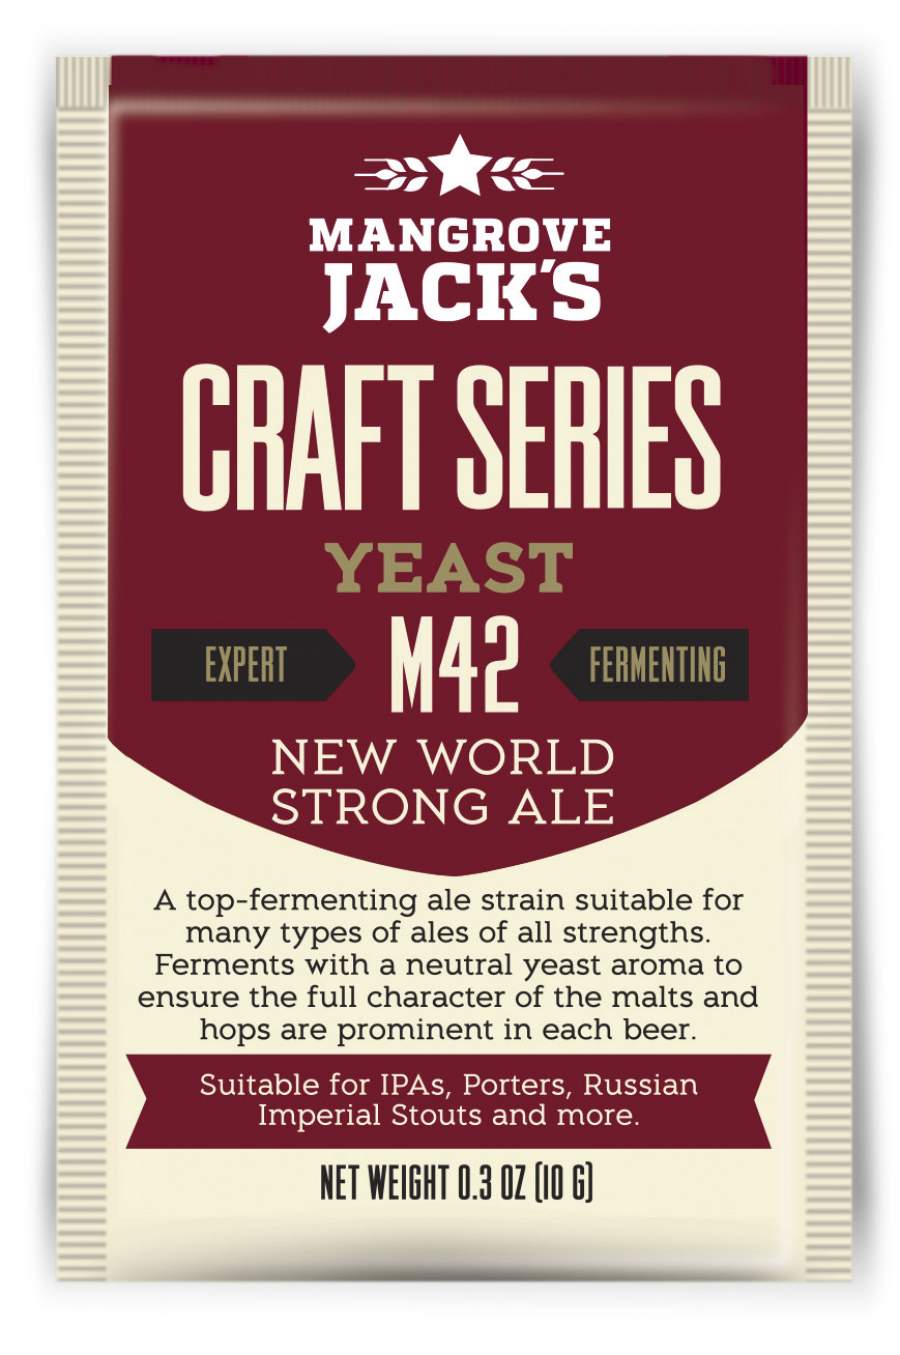 New World Strong Ale M42 - Mangrove Jack's Craft Series - 10 g